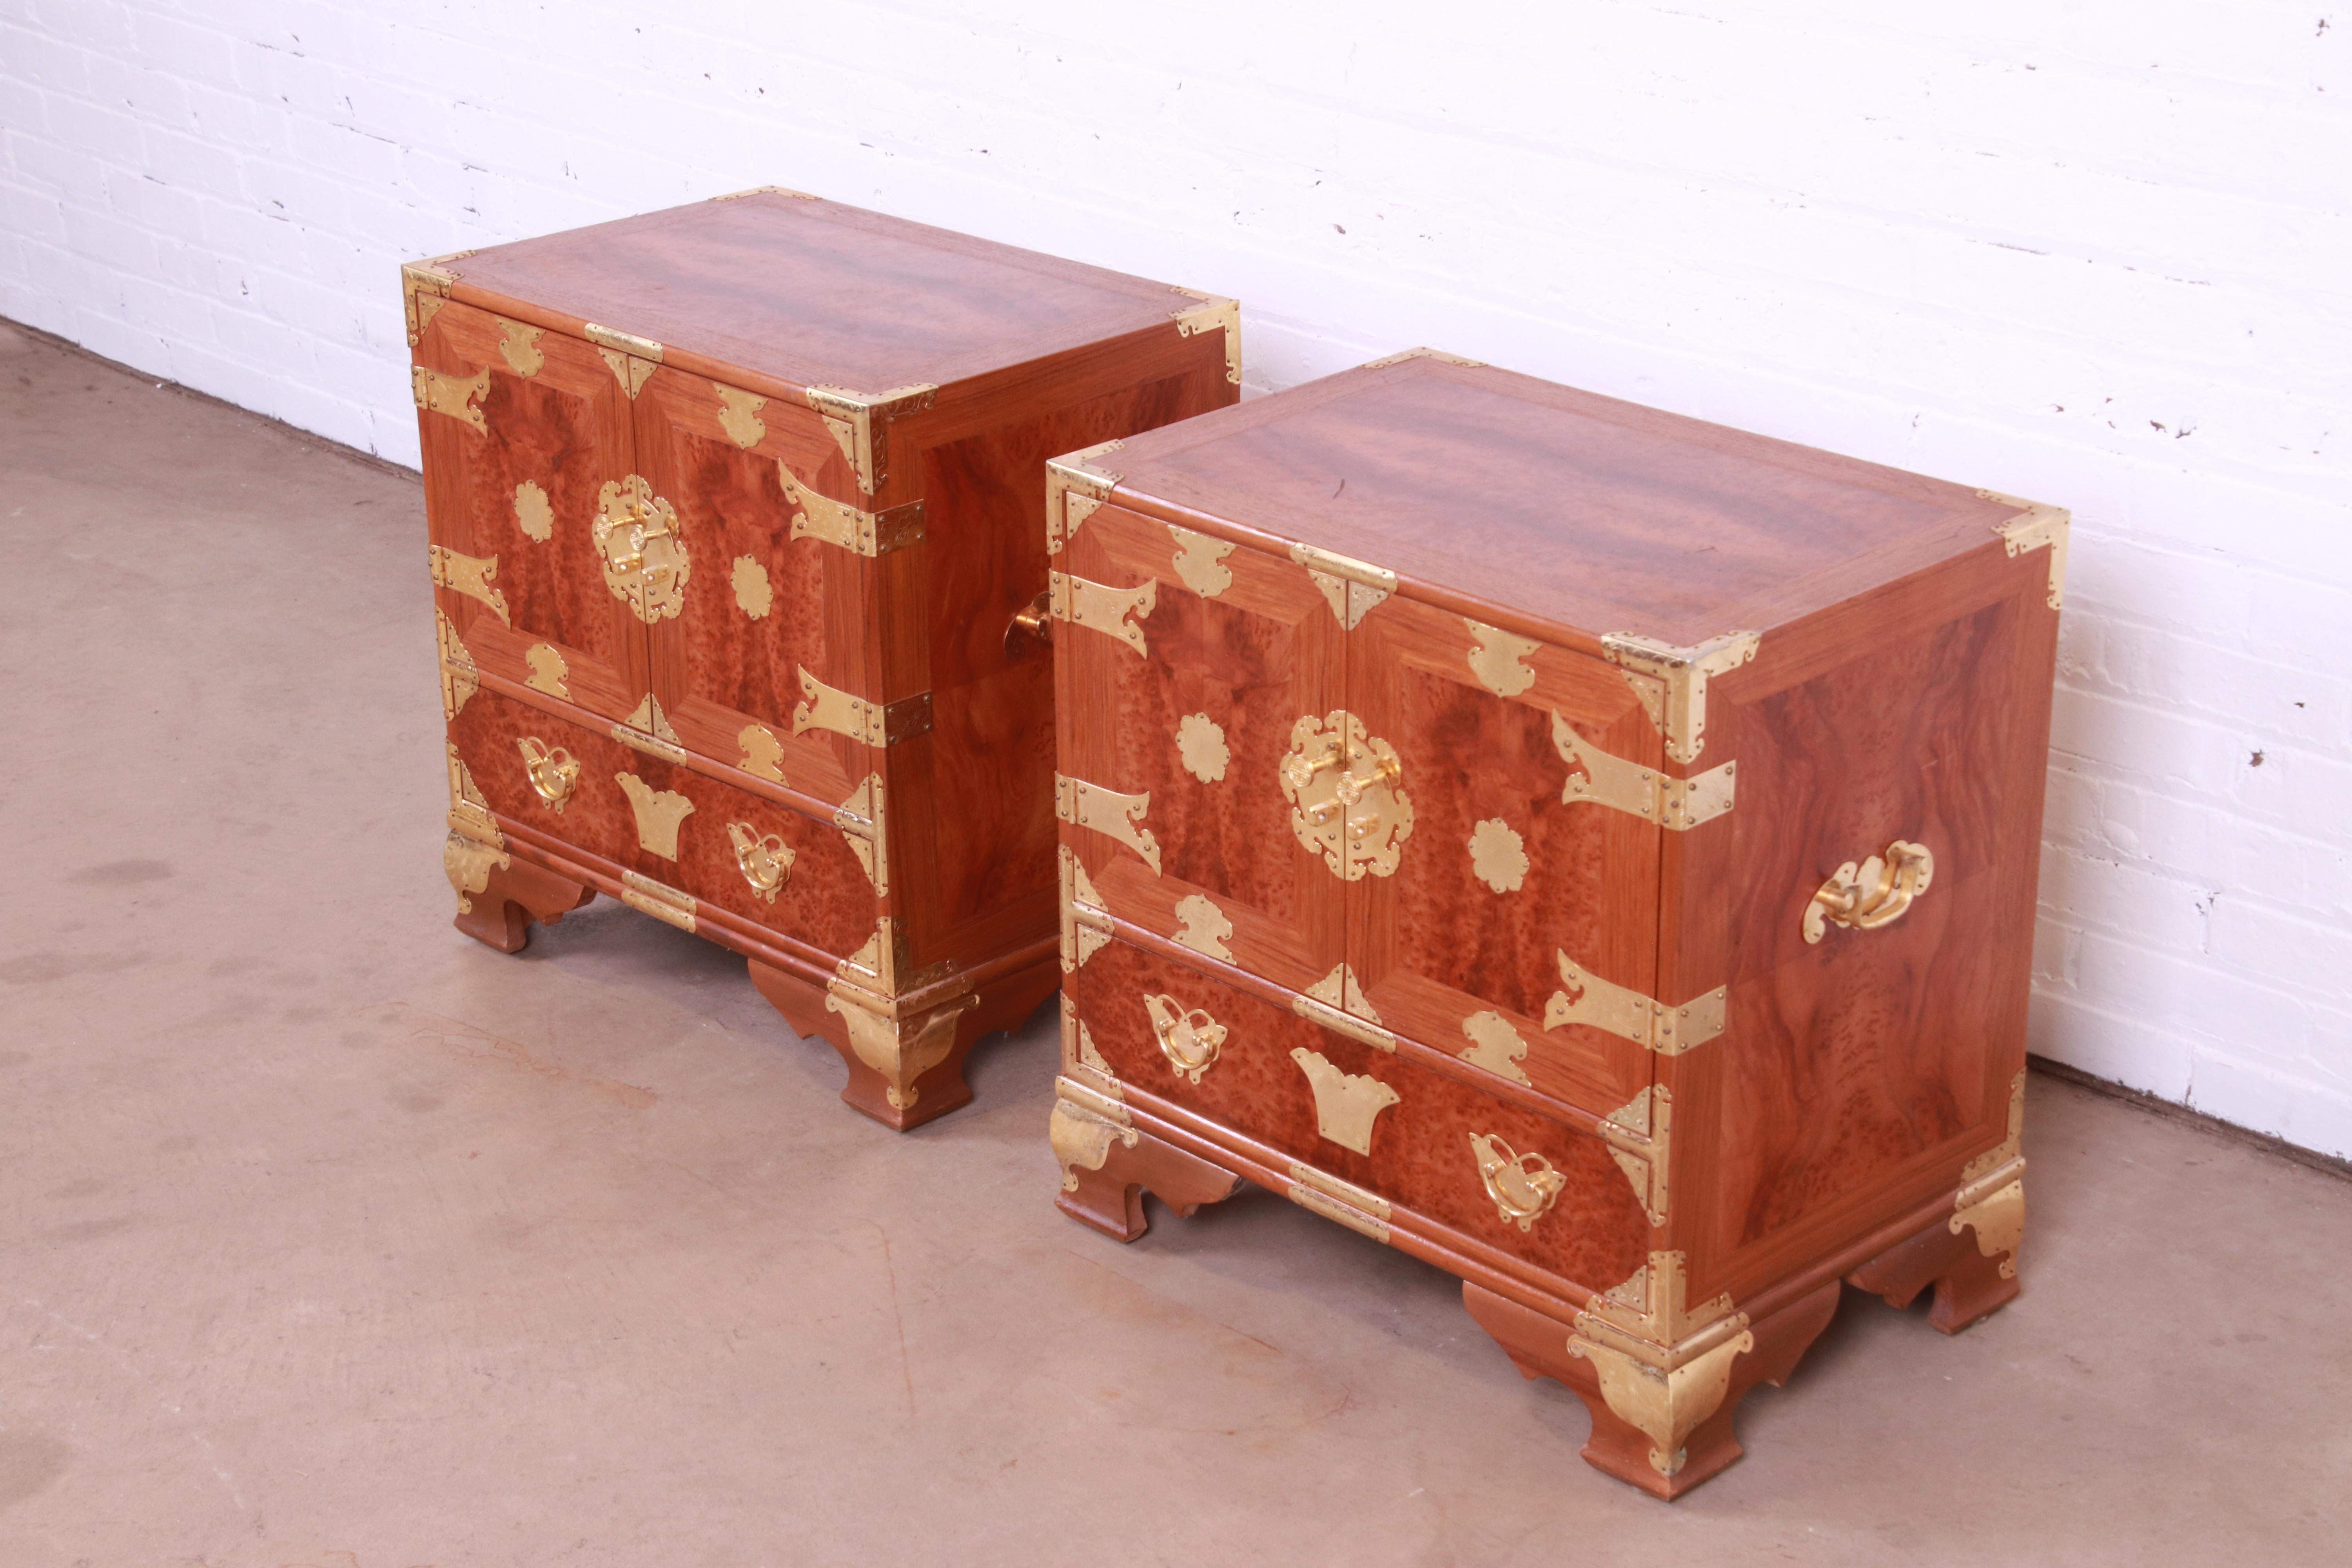 An exceptional pair of Mid-Century Modern Hollywood Regency Chinoiserie bedside chests

Mid-20th Century

Gorgeous figured burl wood, with original Asian-inspired brass mounts and hardware.

Measures: 23.75